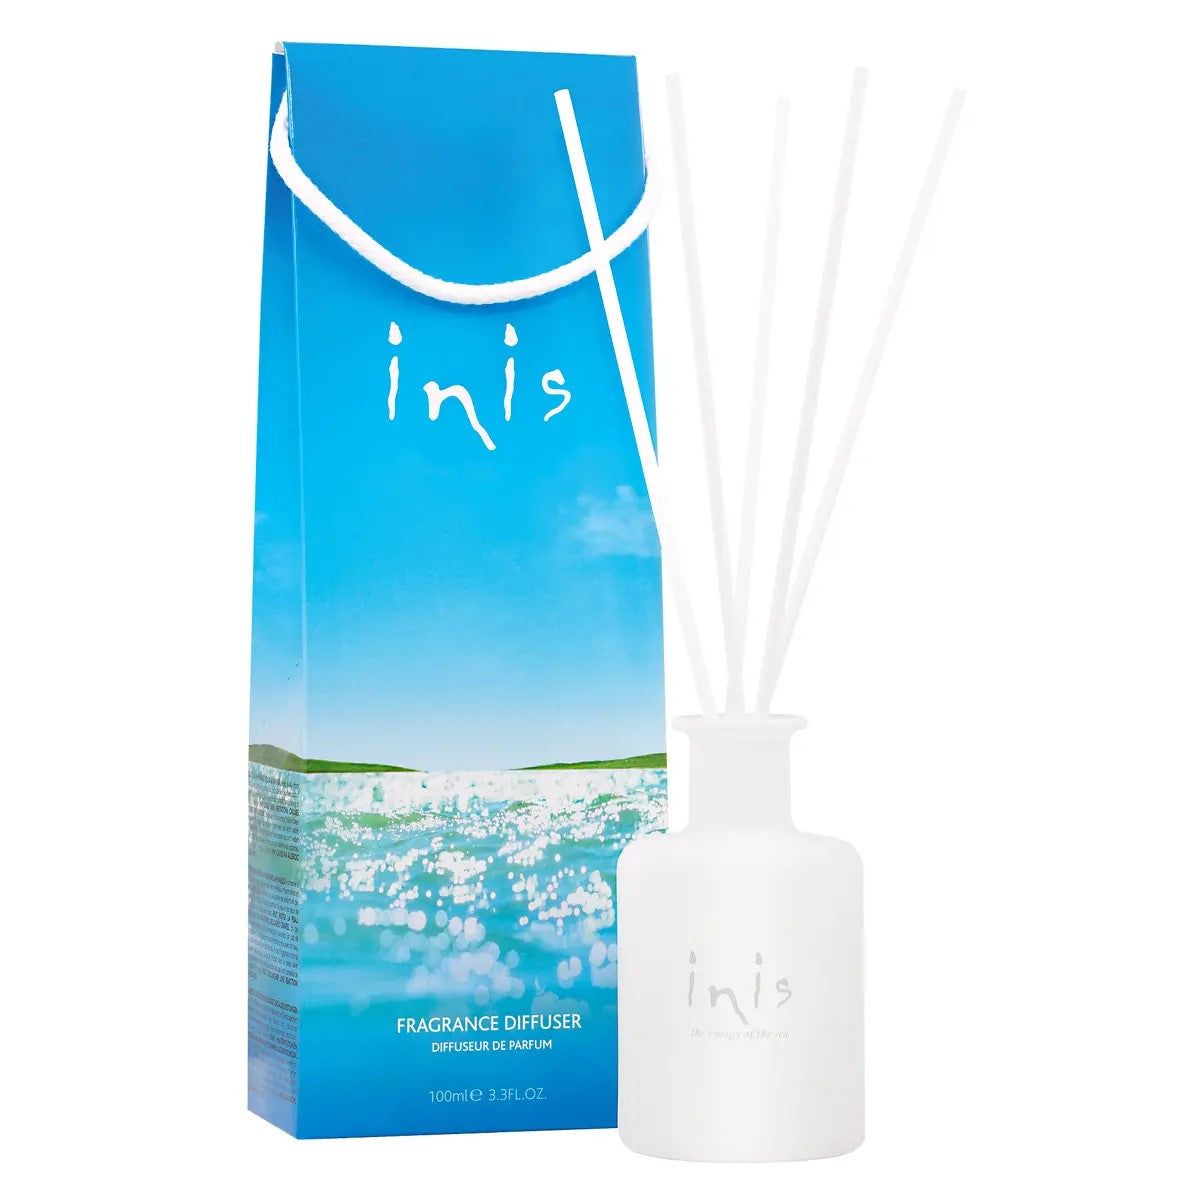 Fragrance Diffuser 100ml - Inis